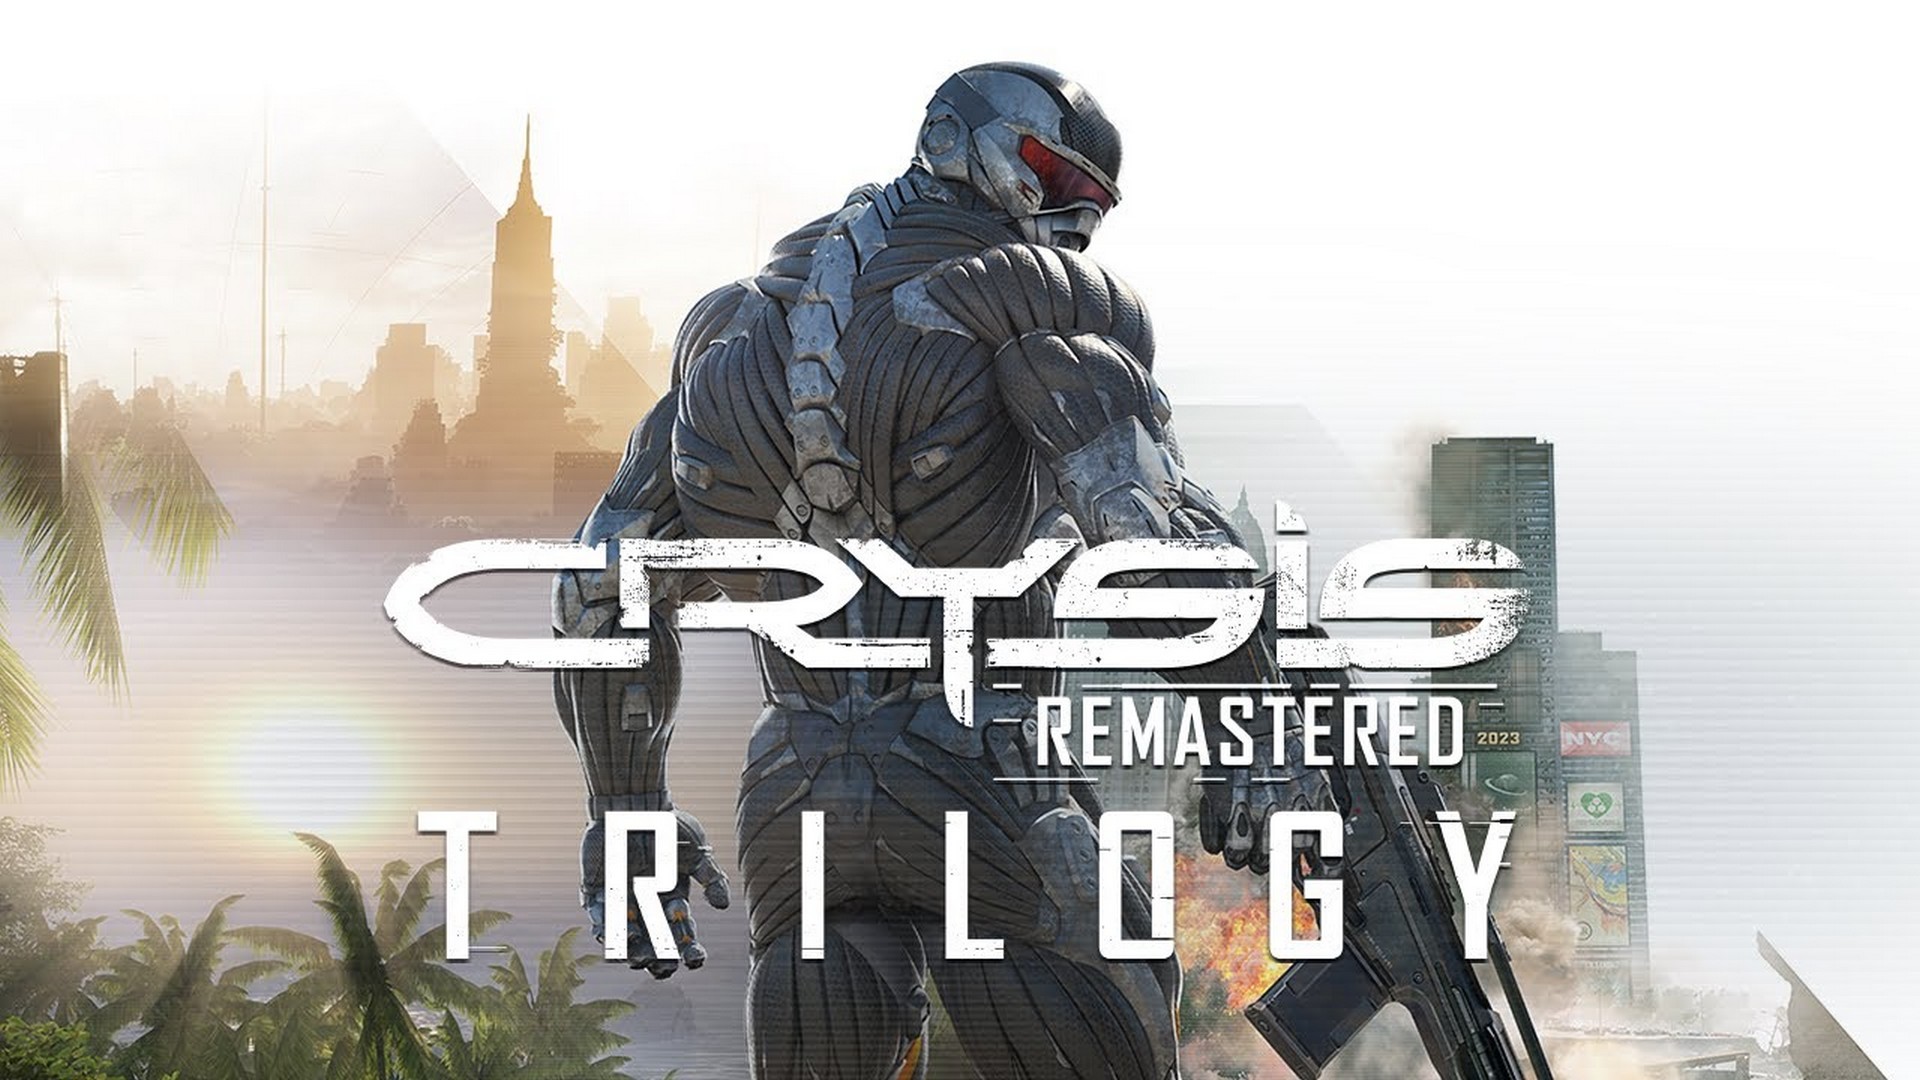 Crysis Remastered Trilogy Out Now At Australian retailers